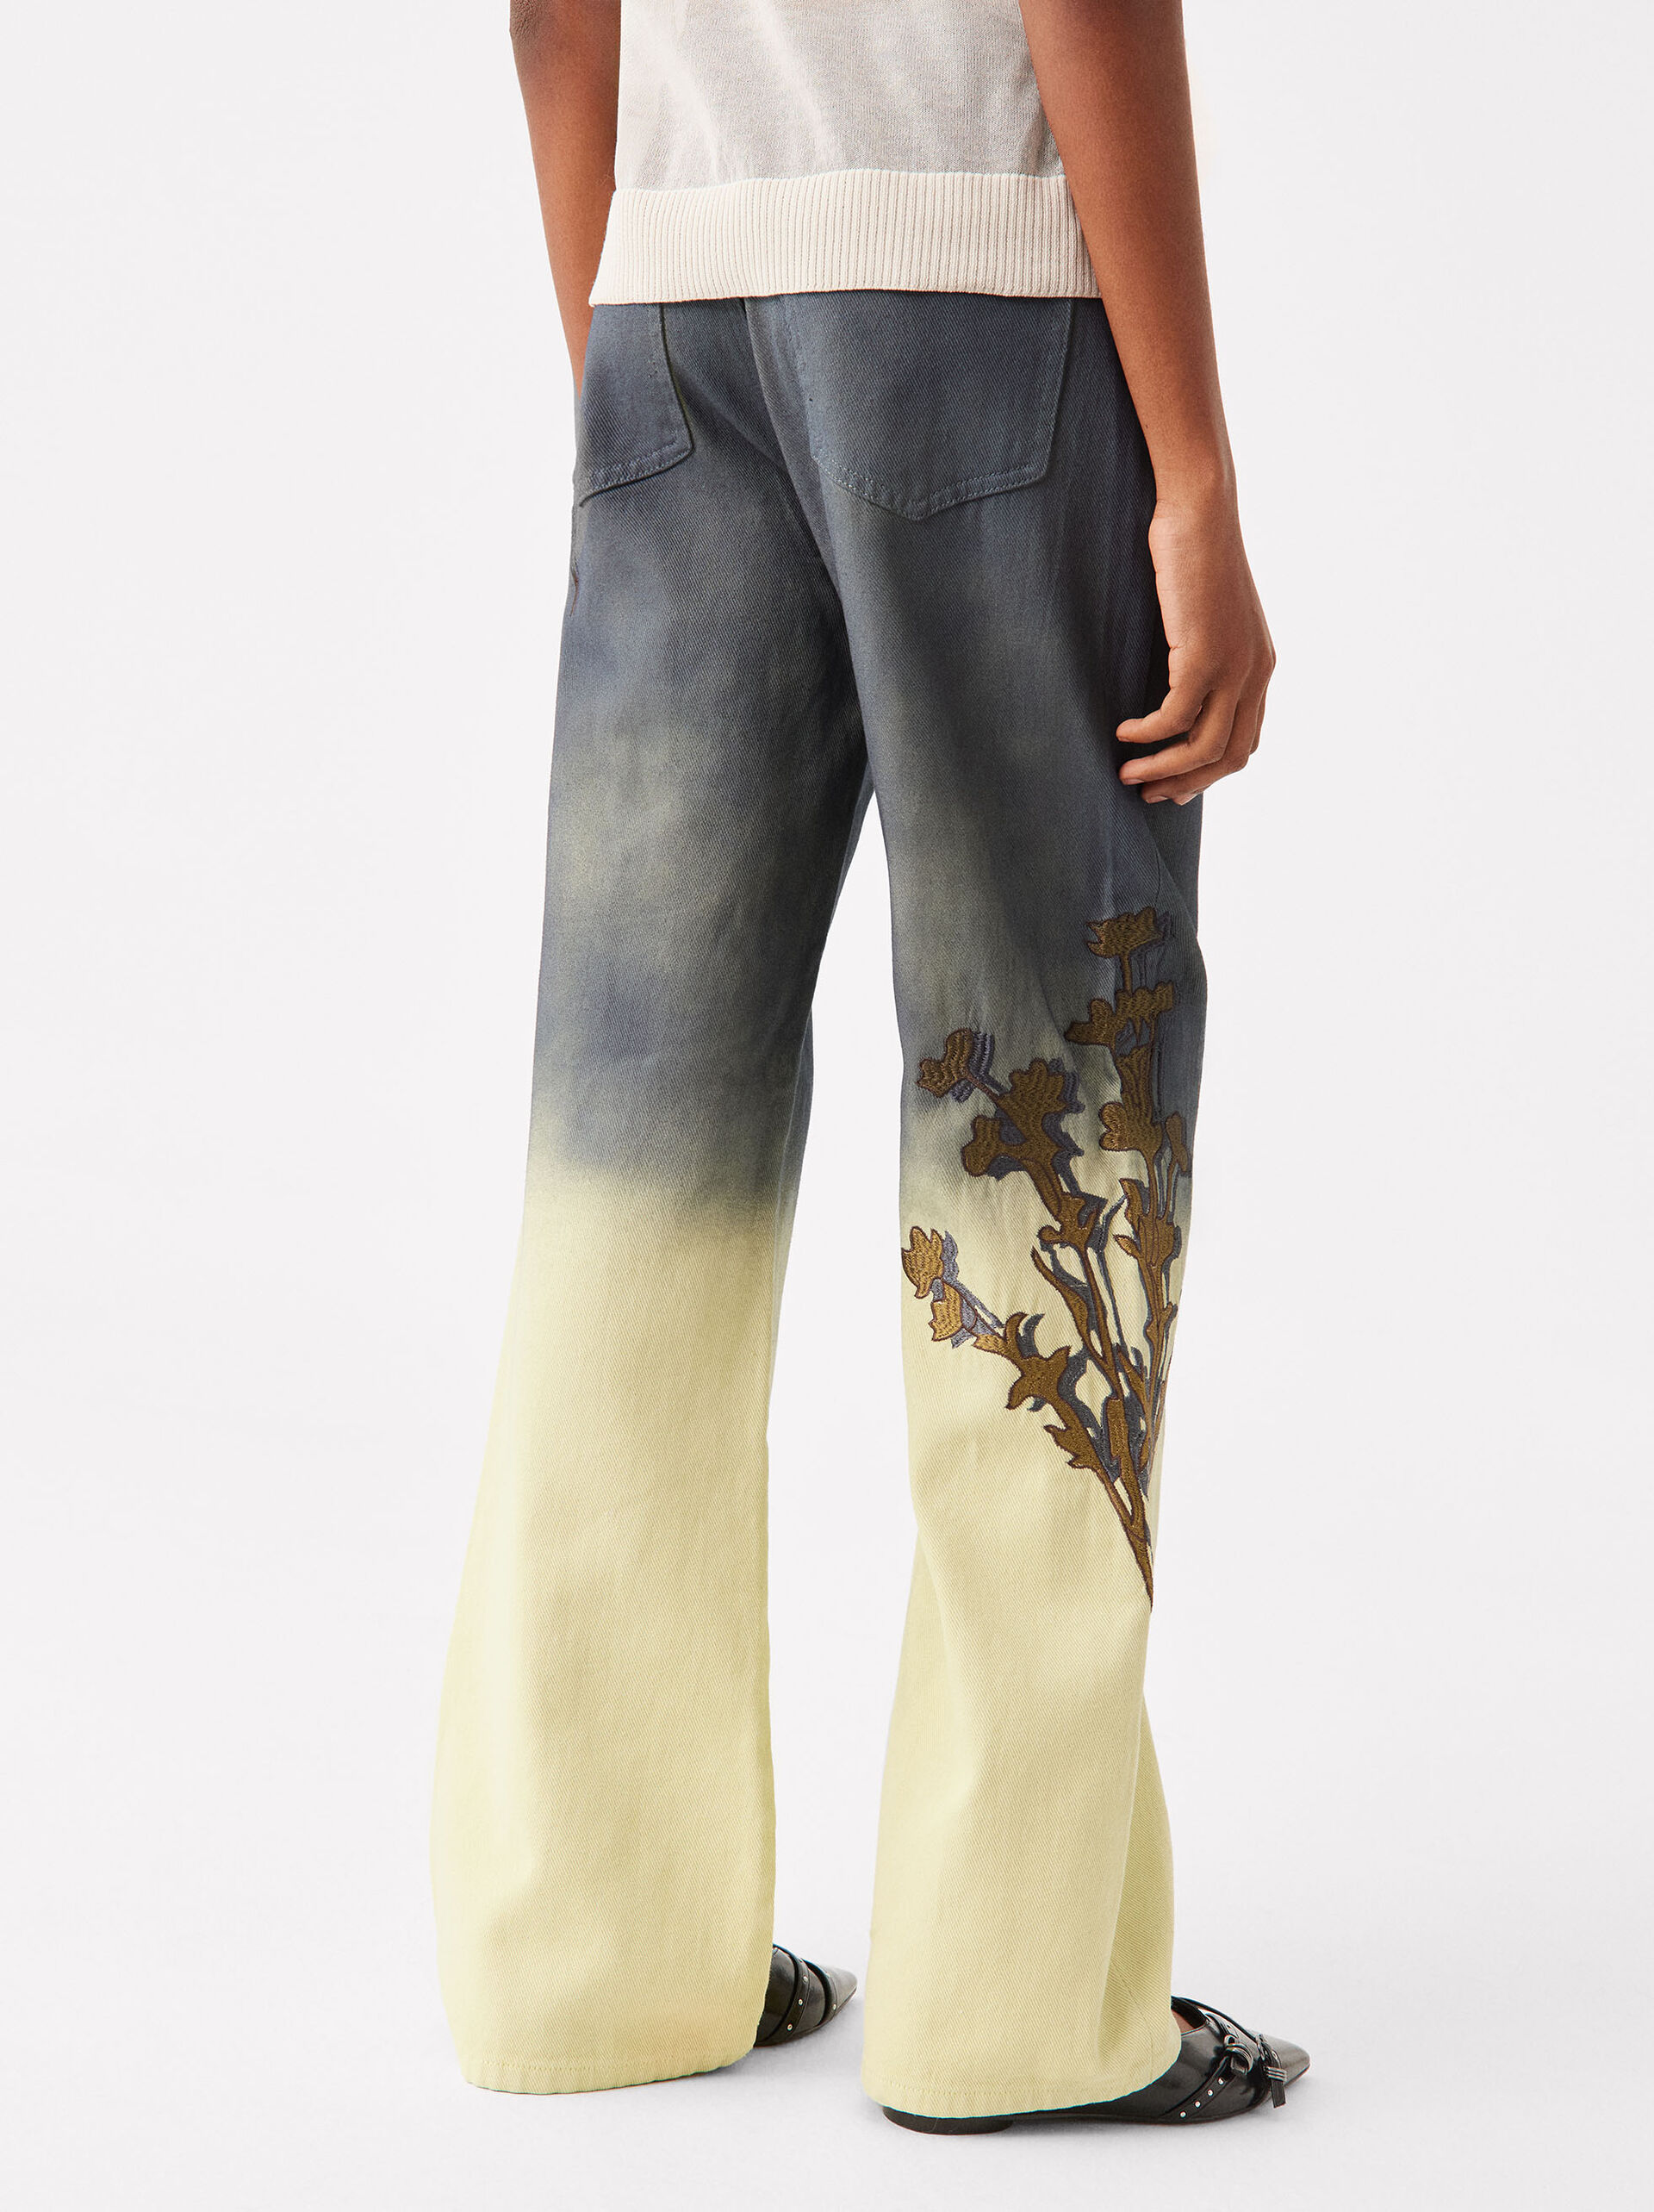 Print Jeans image number 4.0